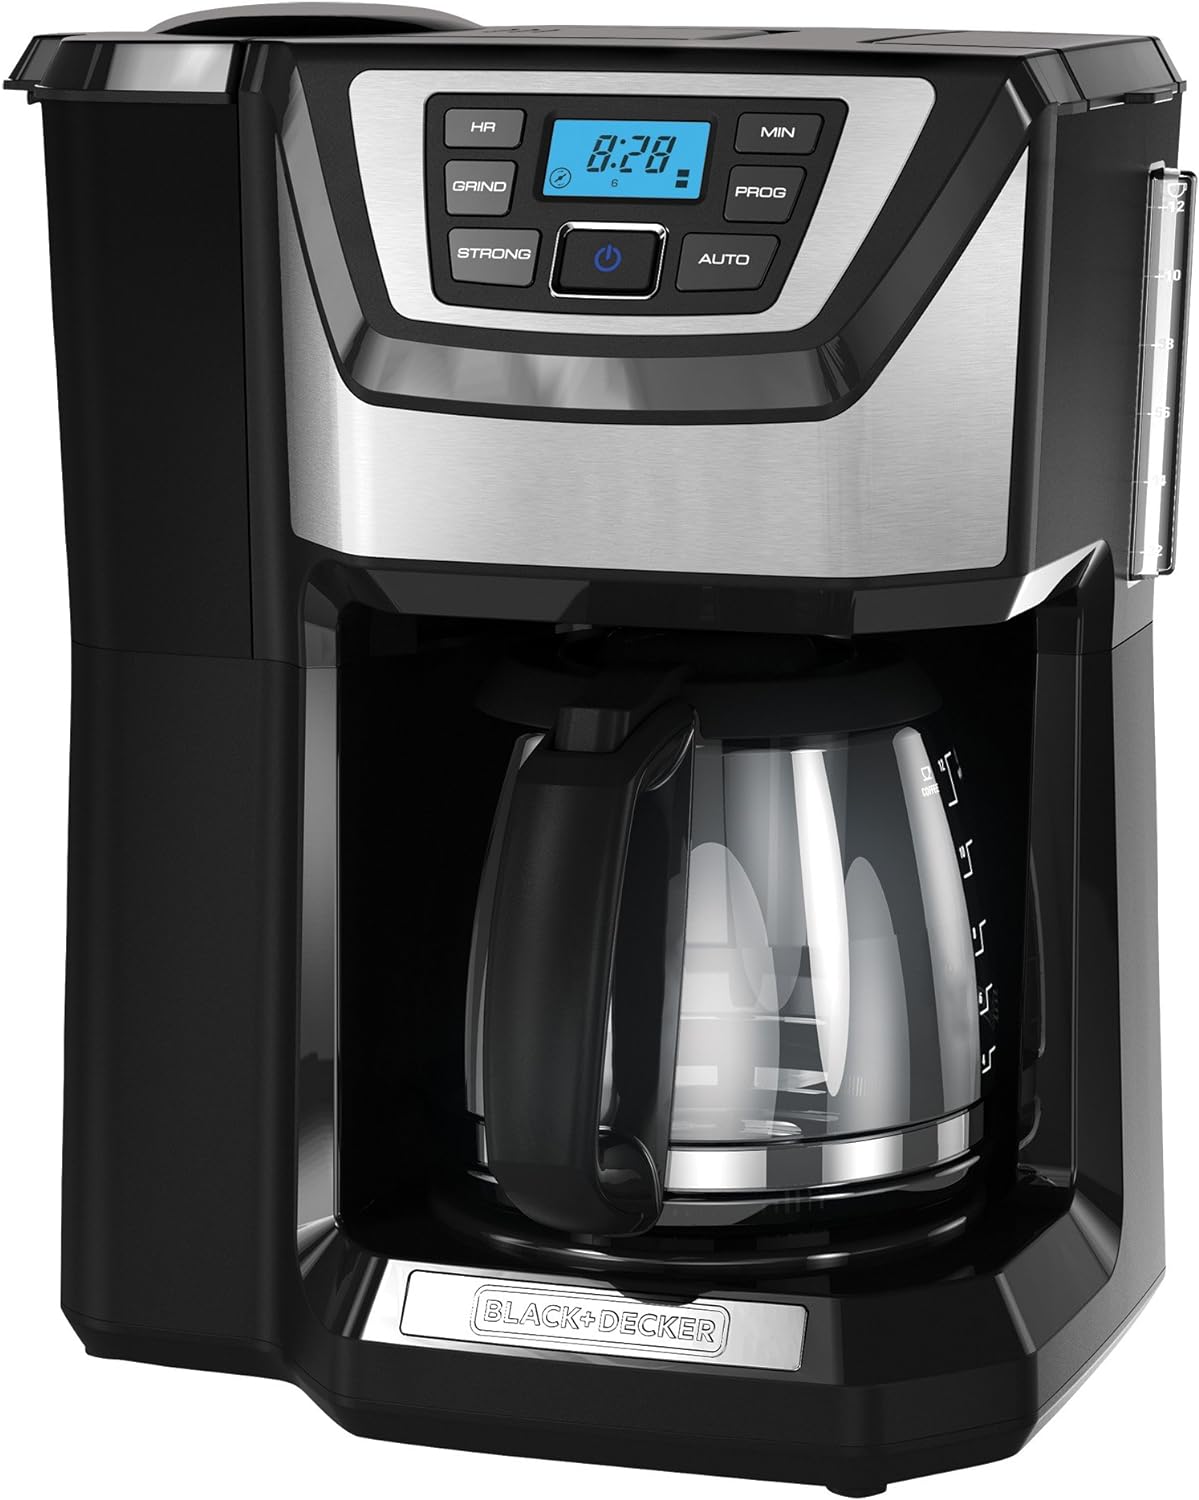 BLACK+DECKER 12-Cup Mill and Brew Coffe Maker, CM5000B, 24-Hour Programble, Built-in Grinder, Sneak-A-Cup, Permanent Washable Fitler